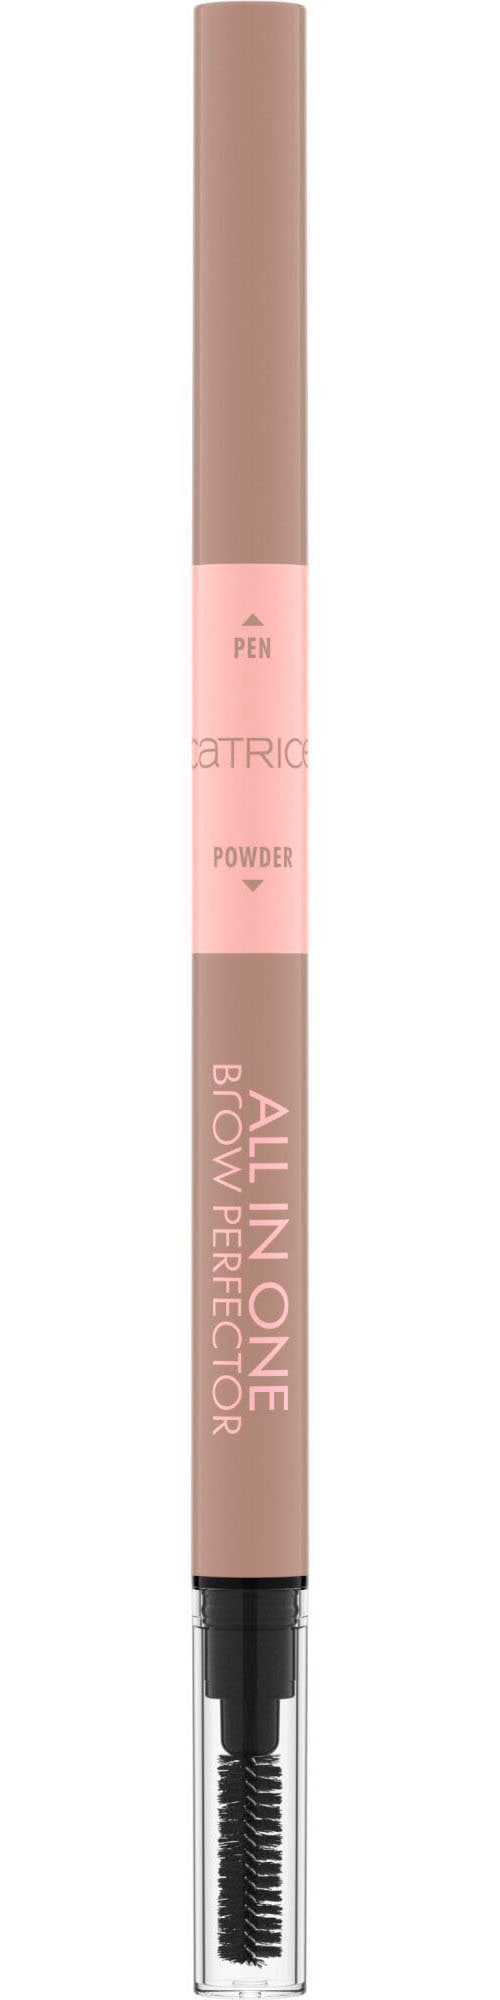 Catrice Augenbrauen-Stift »All in One Brow Per...